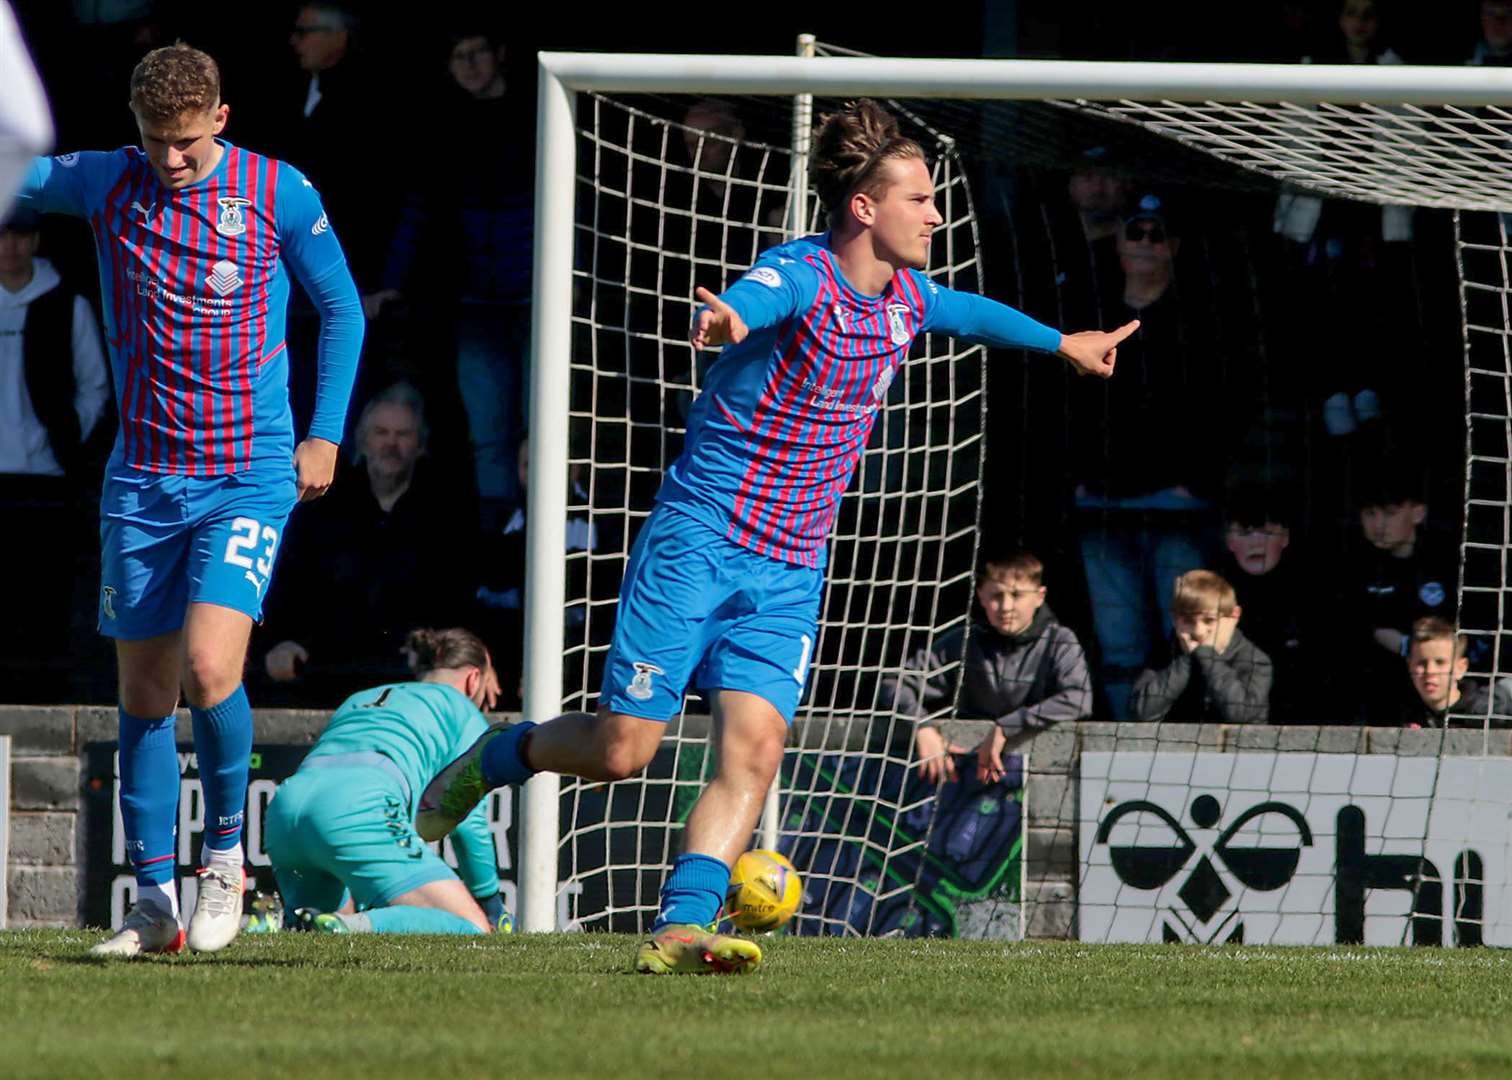 Attacker disappointed with Caley Thistle's second half performance at Somerset Park.